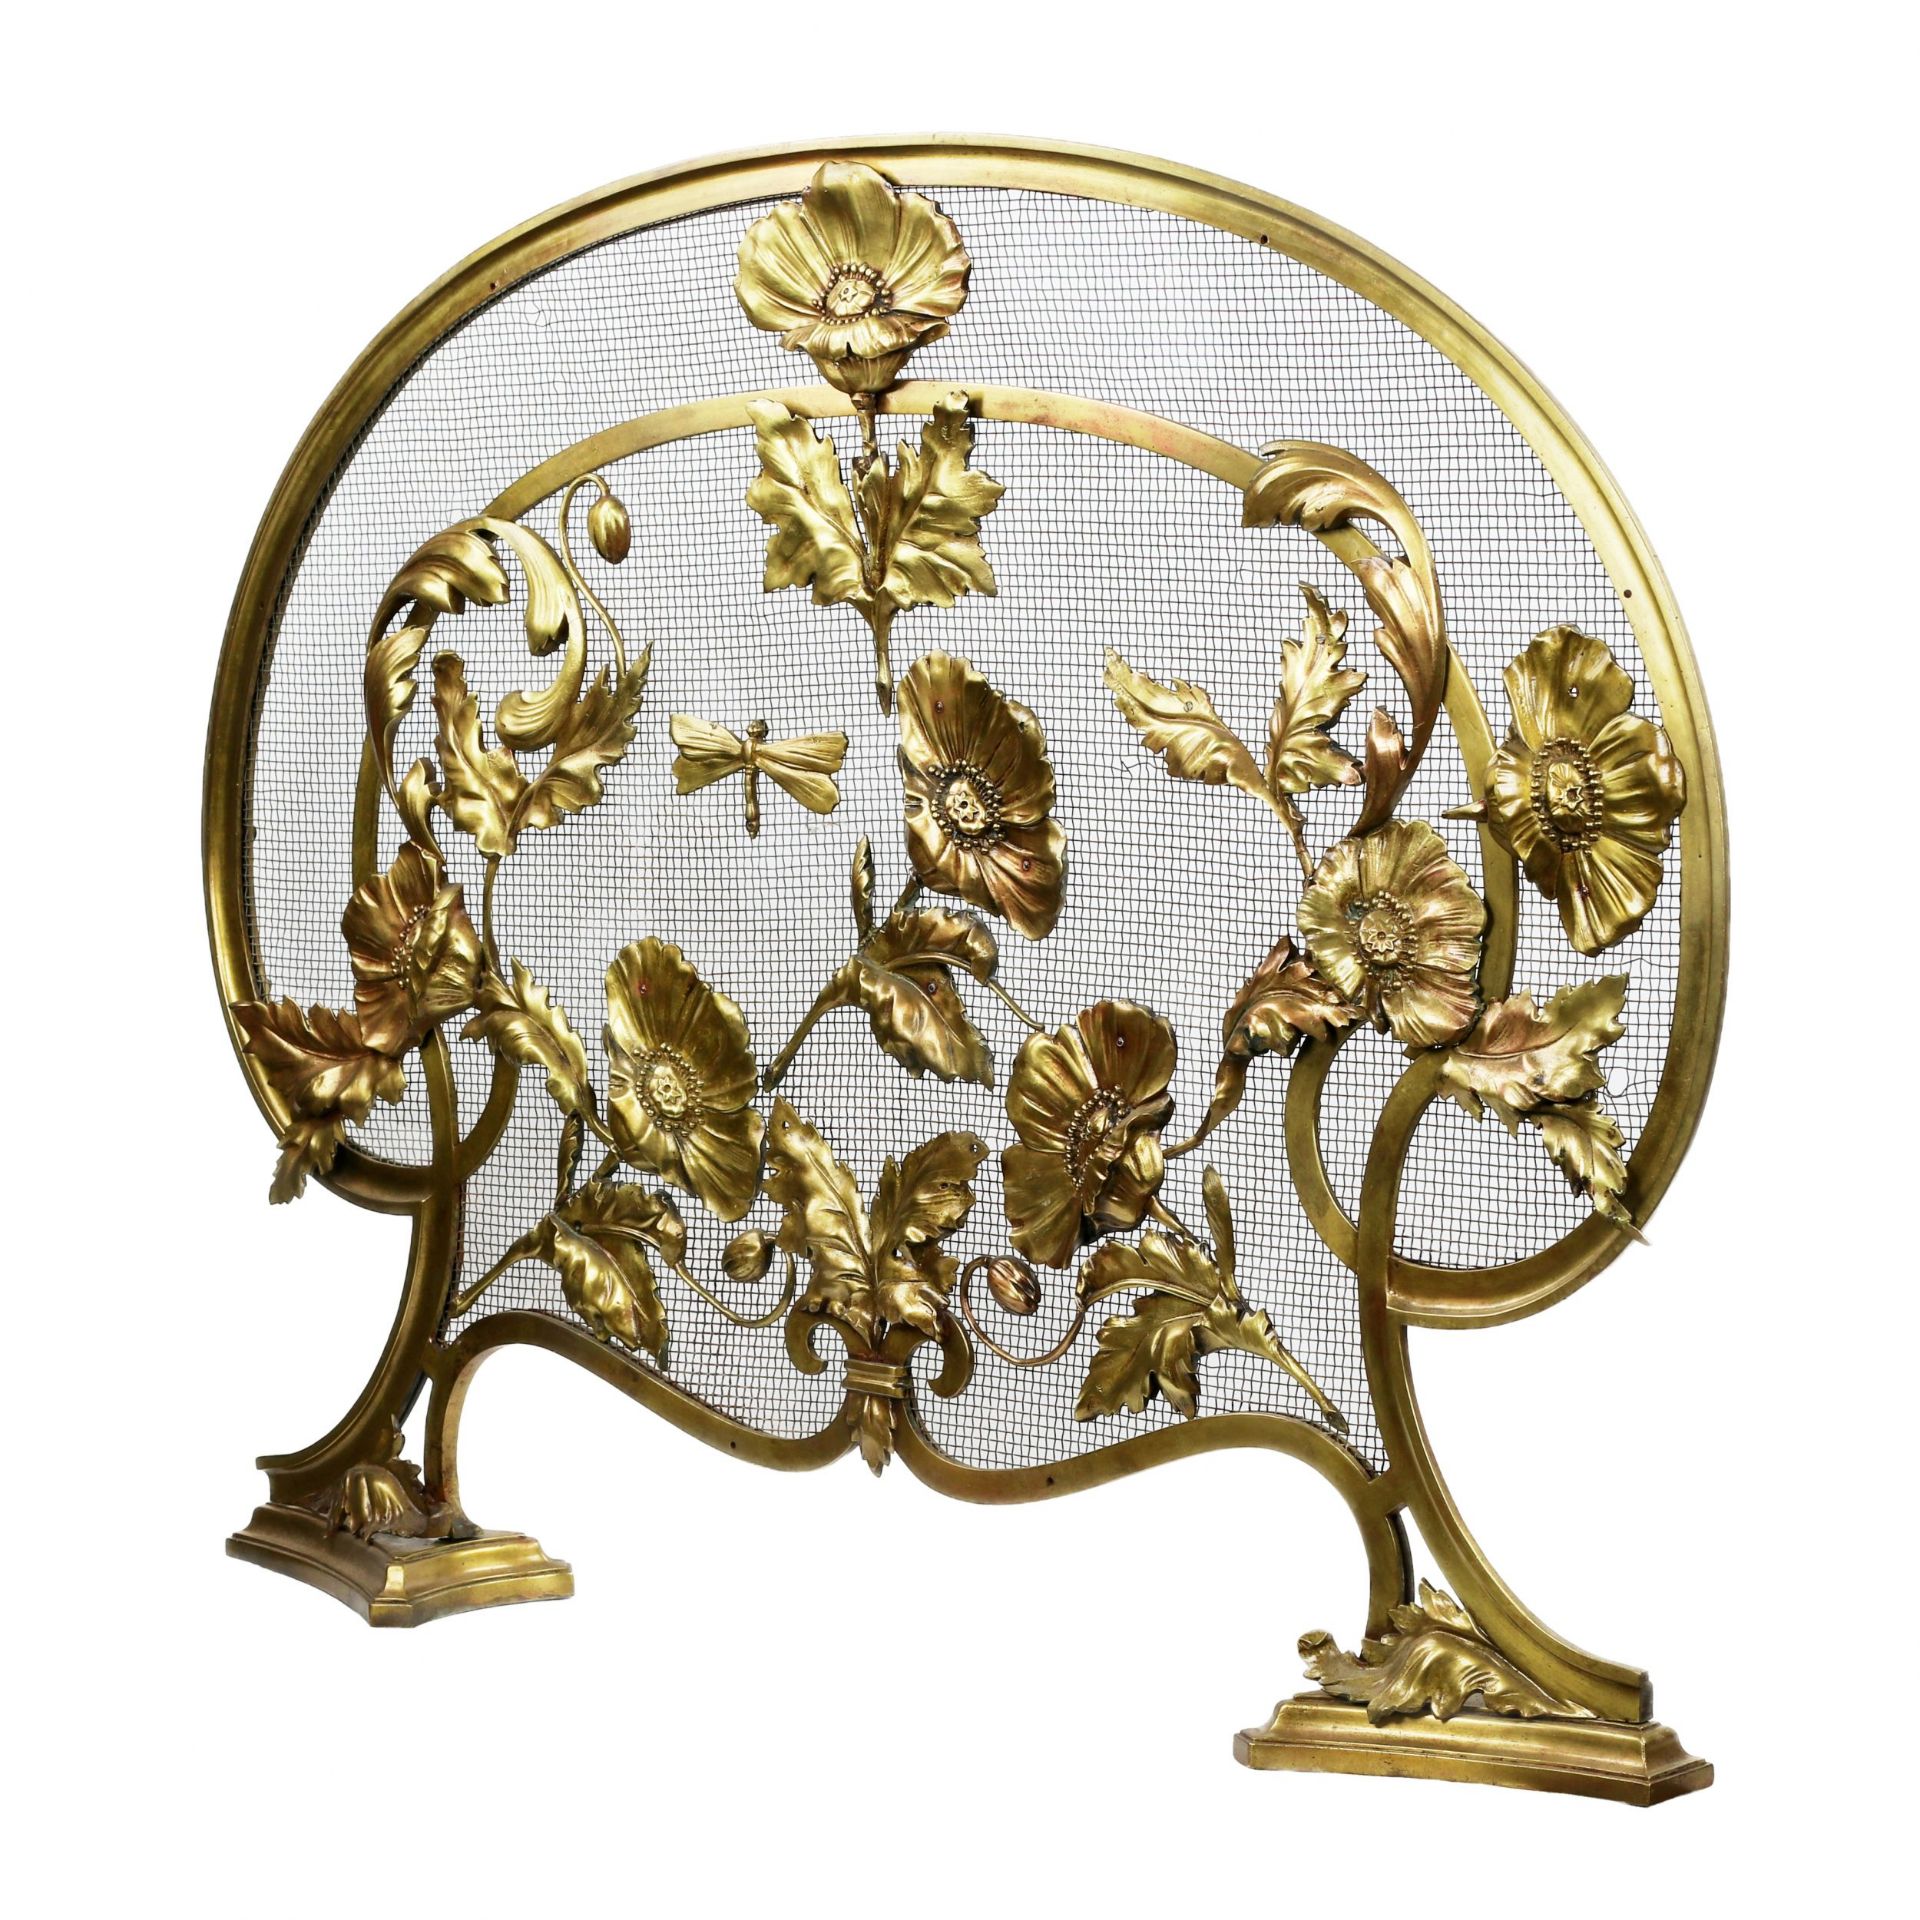 Elegant mantel screen in bronze, with poppies, in Art Nouveau style. France, around 1900 - Image 2 of 4